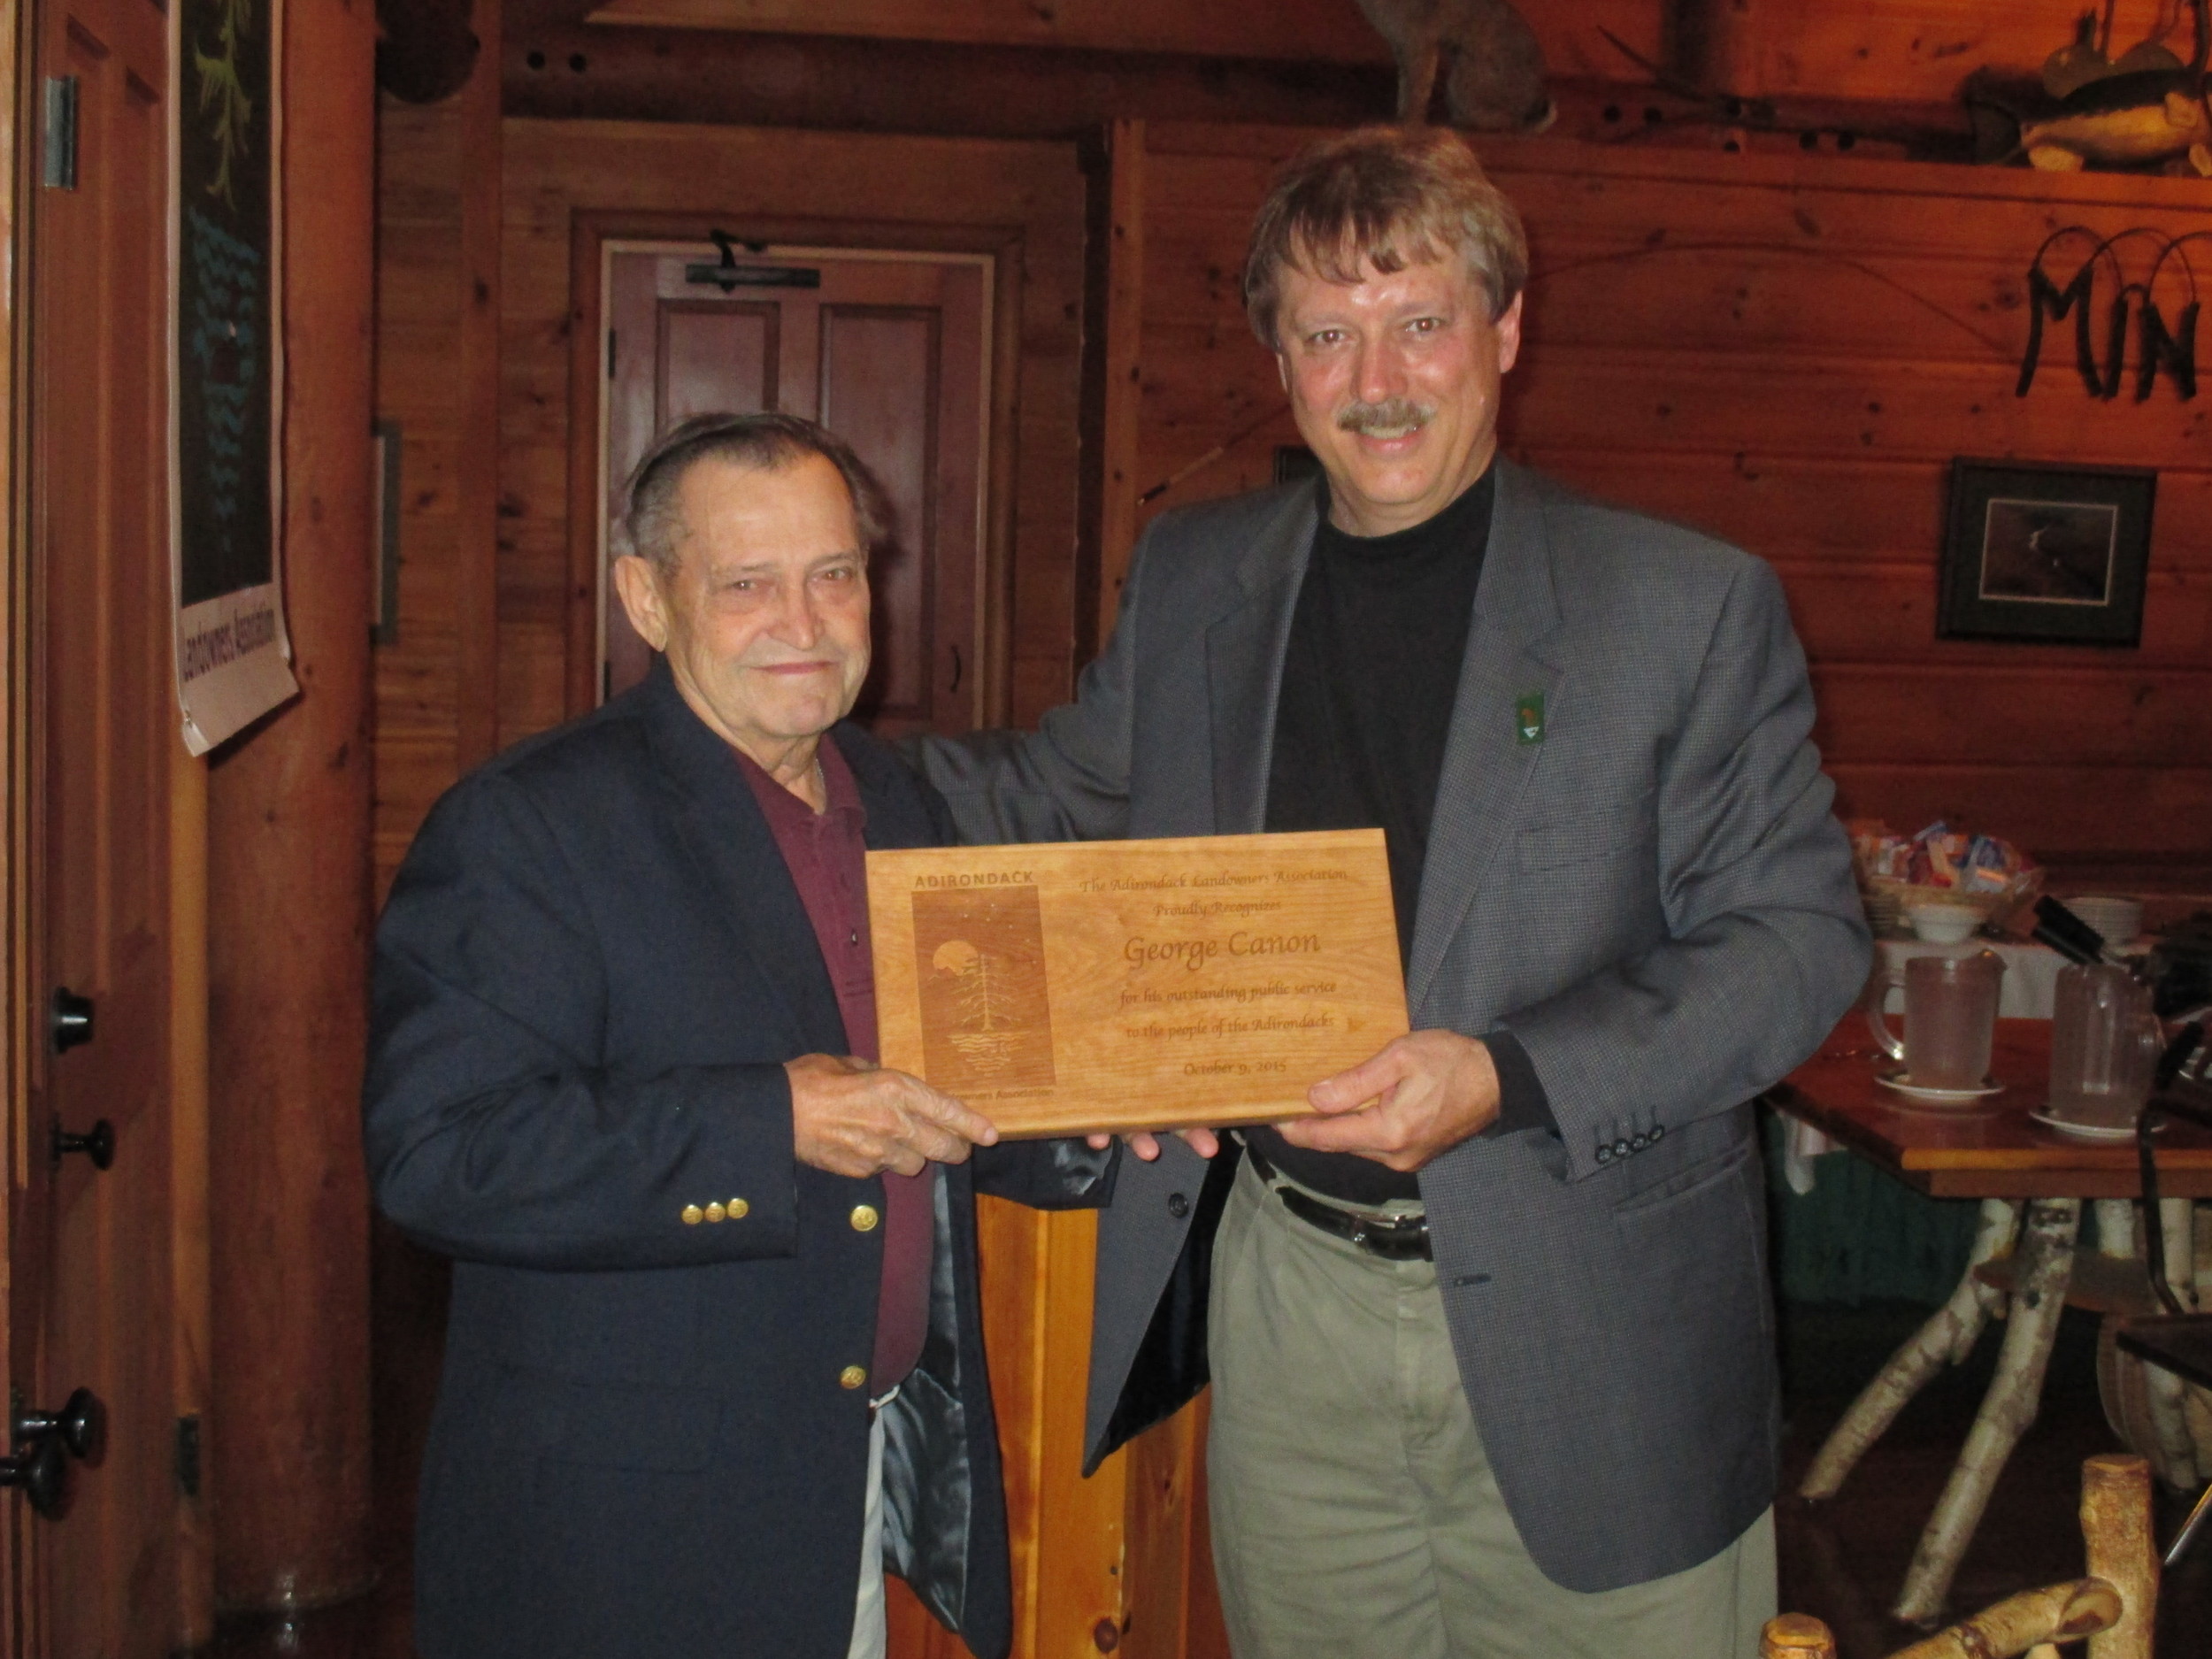   Town of Newcomb Supervisor, George Canon receives a special tribute from the ALA in recognition of his retirement.  